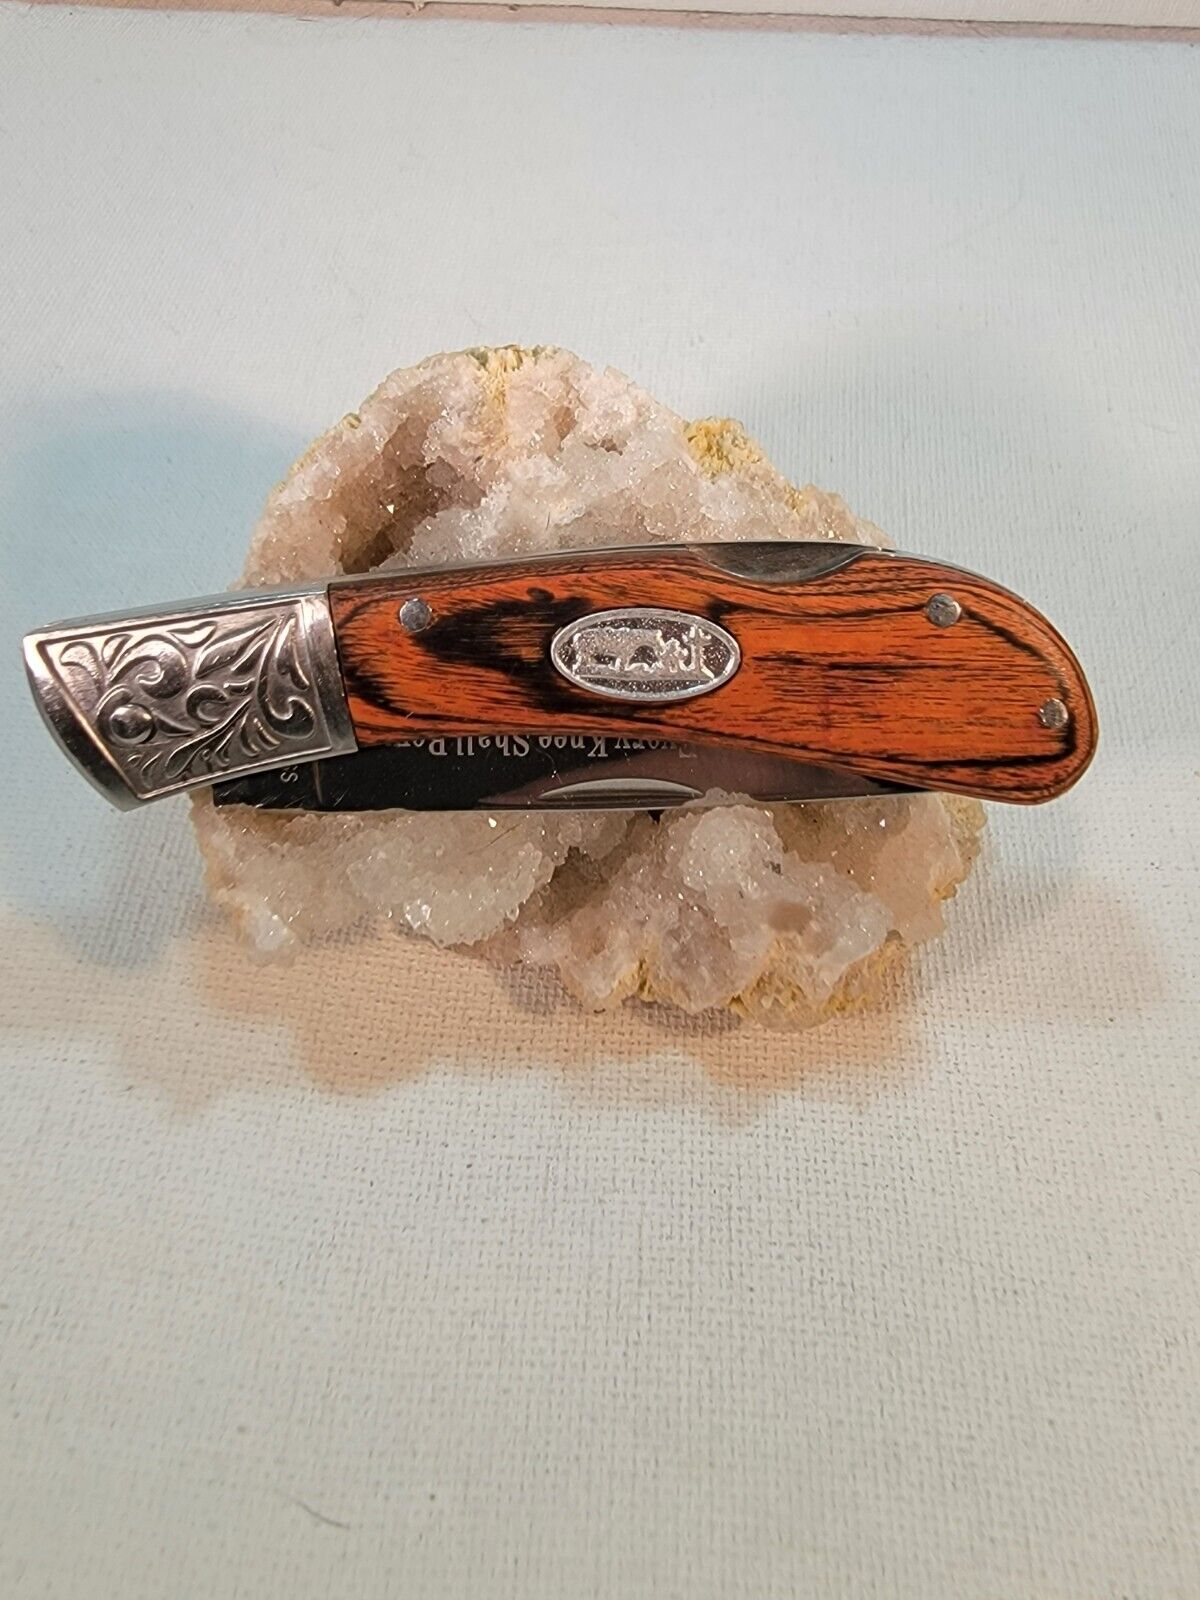 Vintage Collectable Pocket Knives Signed On Blade Every Knee Shall Bow